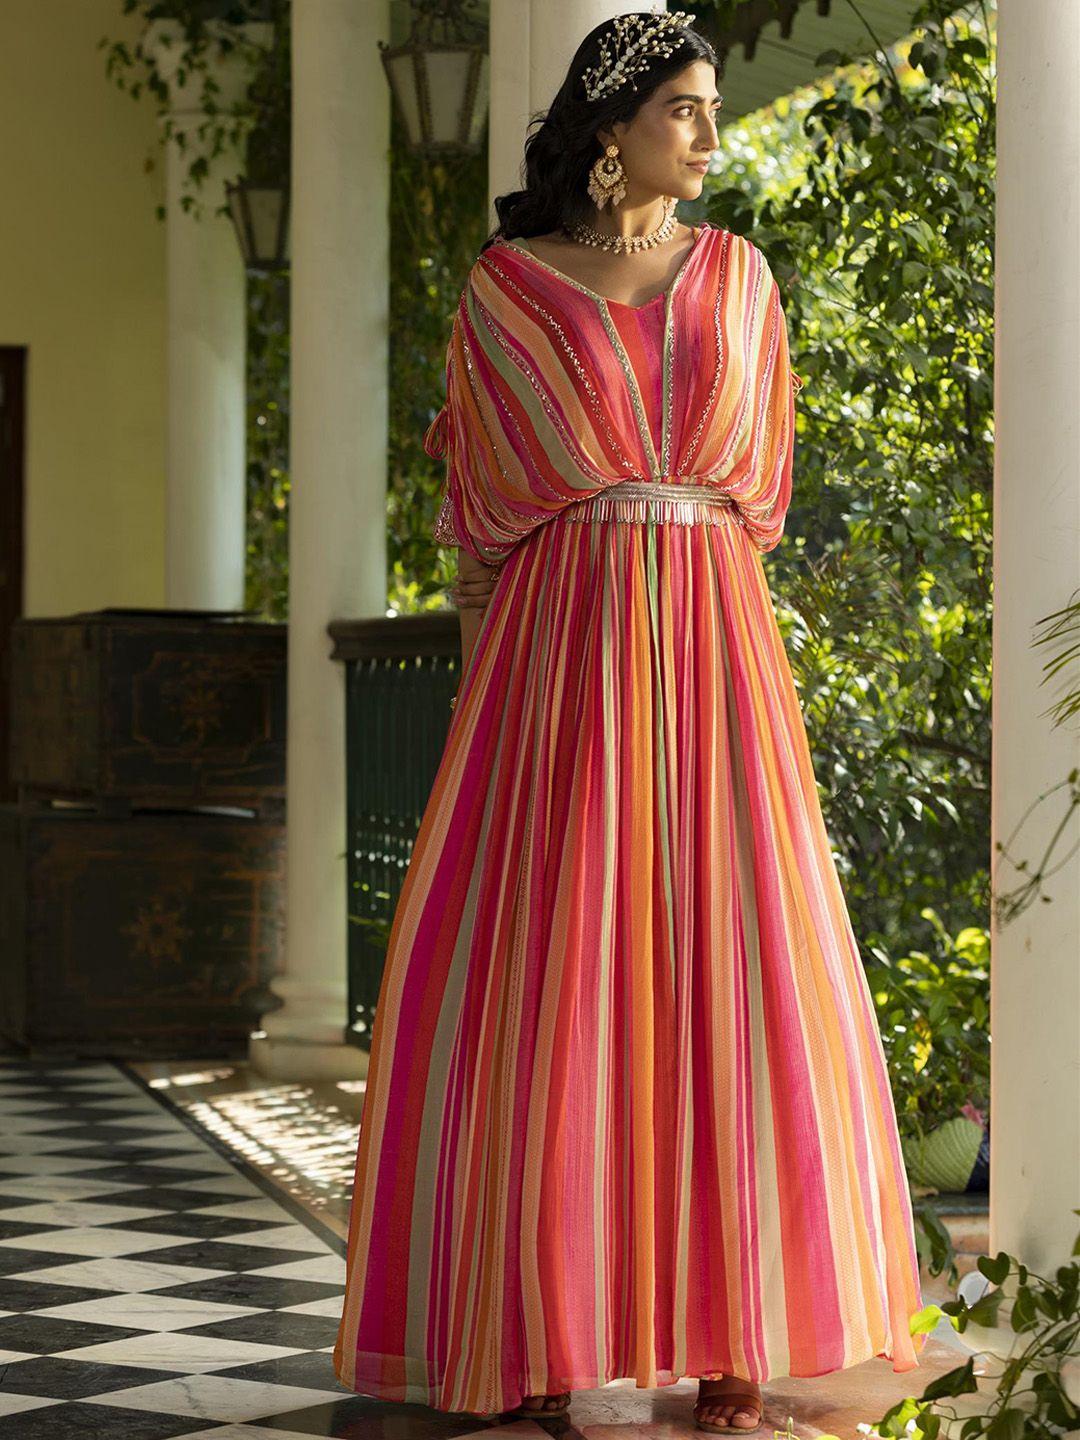 scakhi-candy-striped-maxi-length-gown-ethnic-dress-with-belt-and-attached-cape